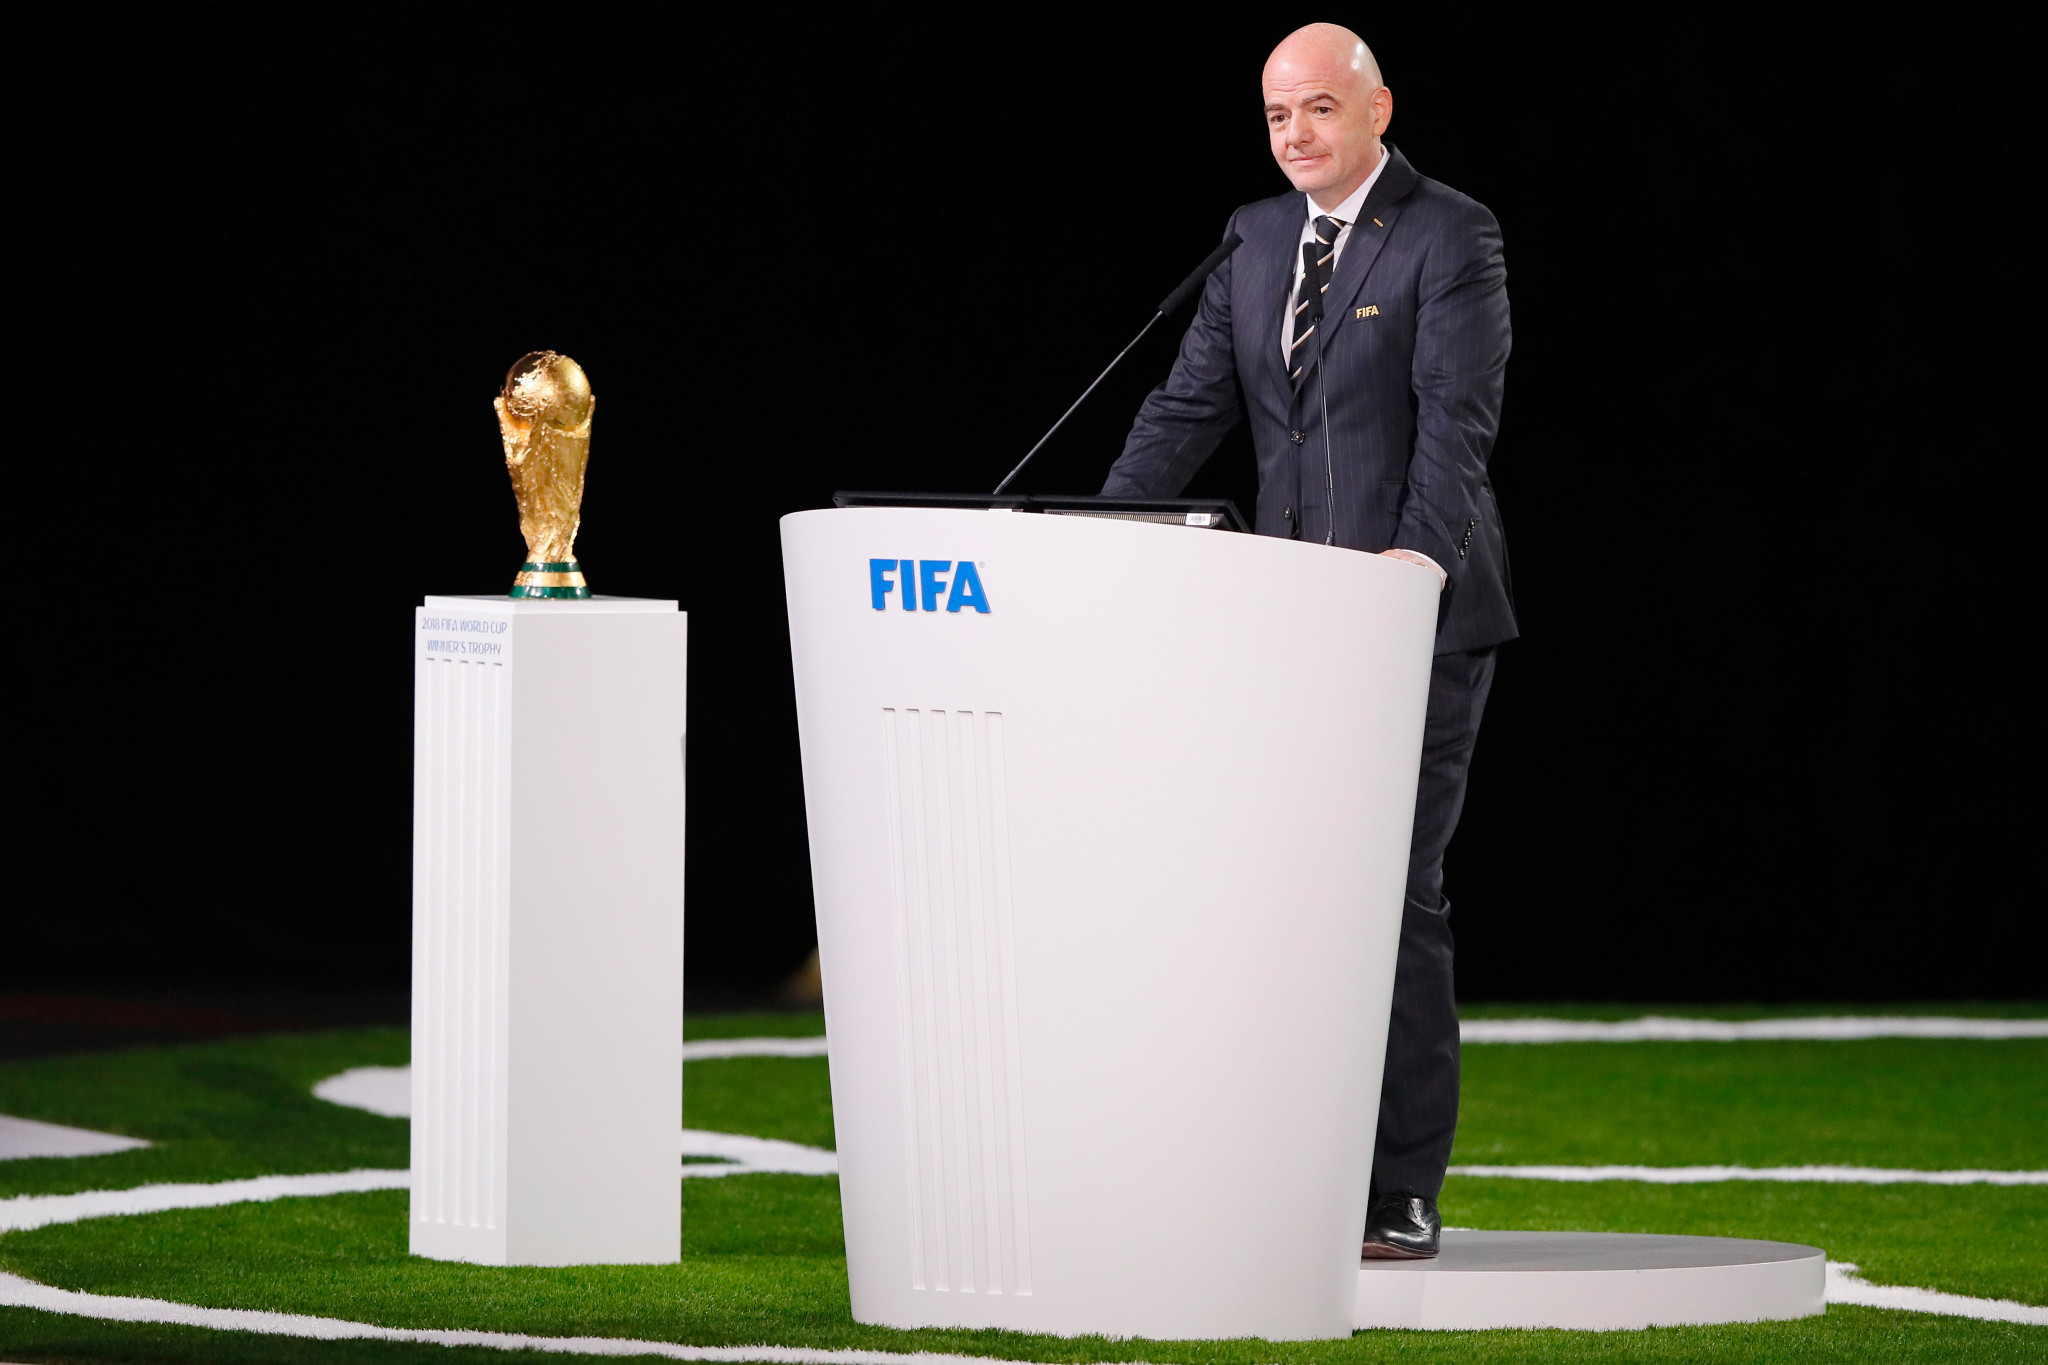 Gianni Infantino has previously said a biennial World Cup could bring 